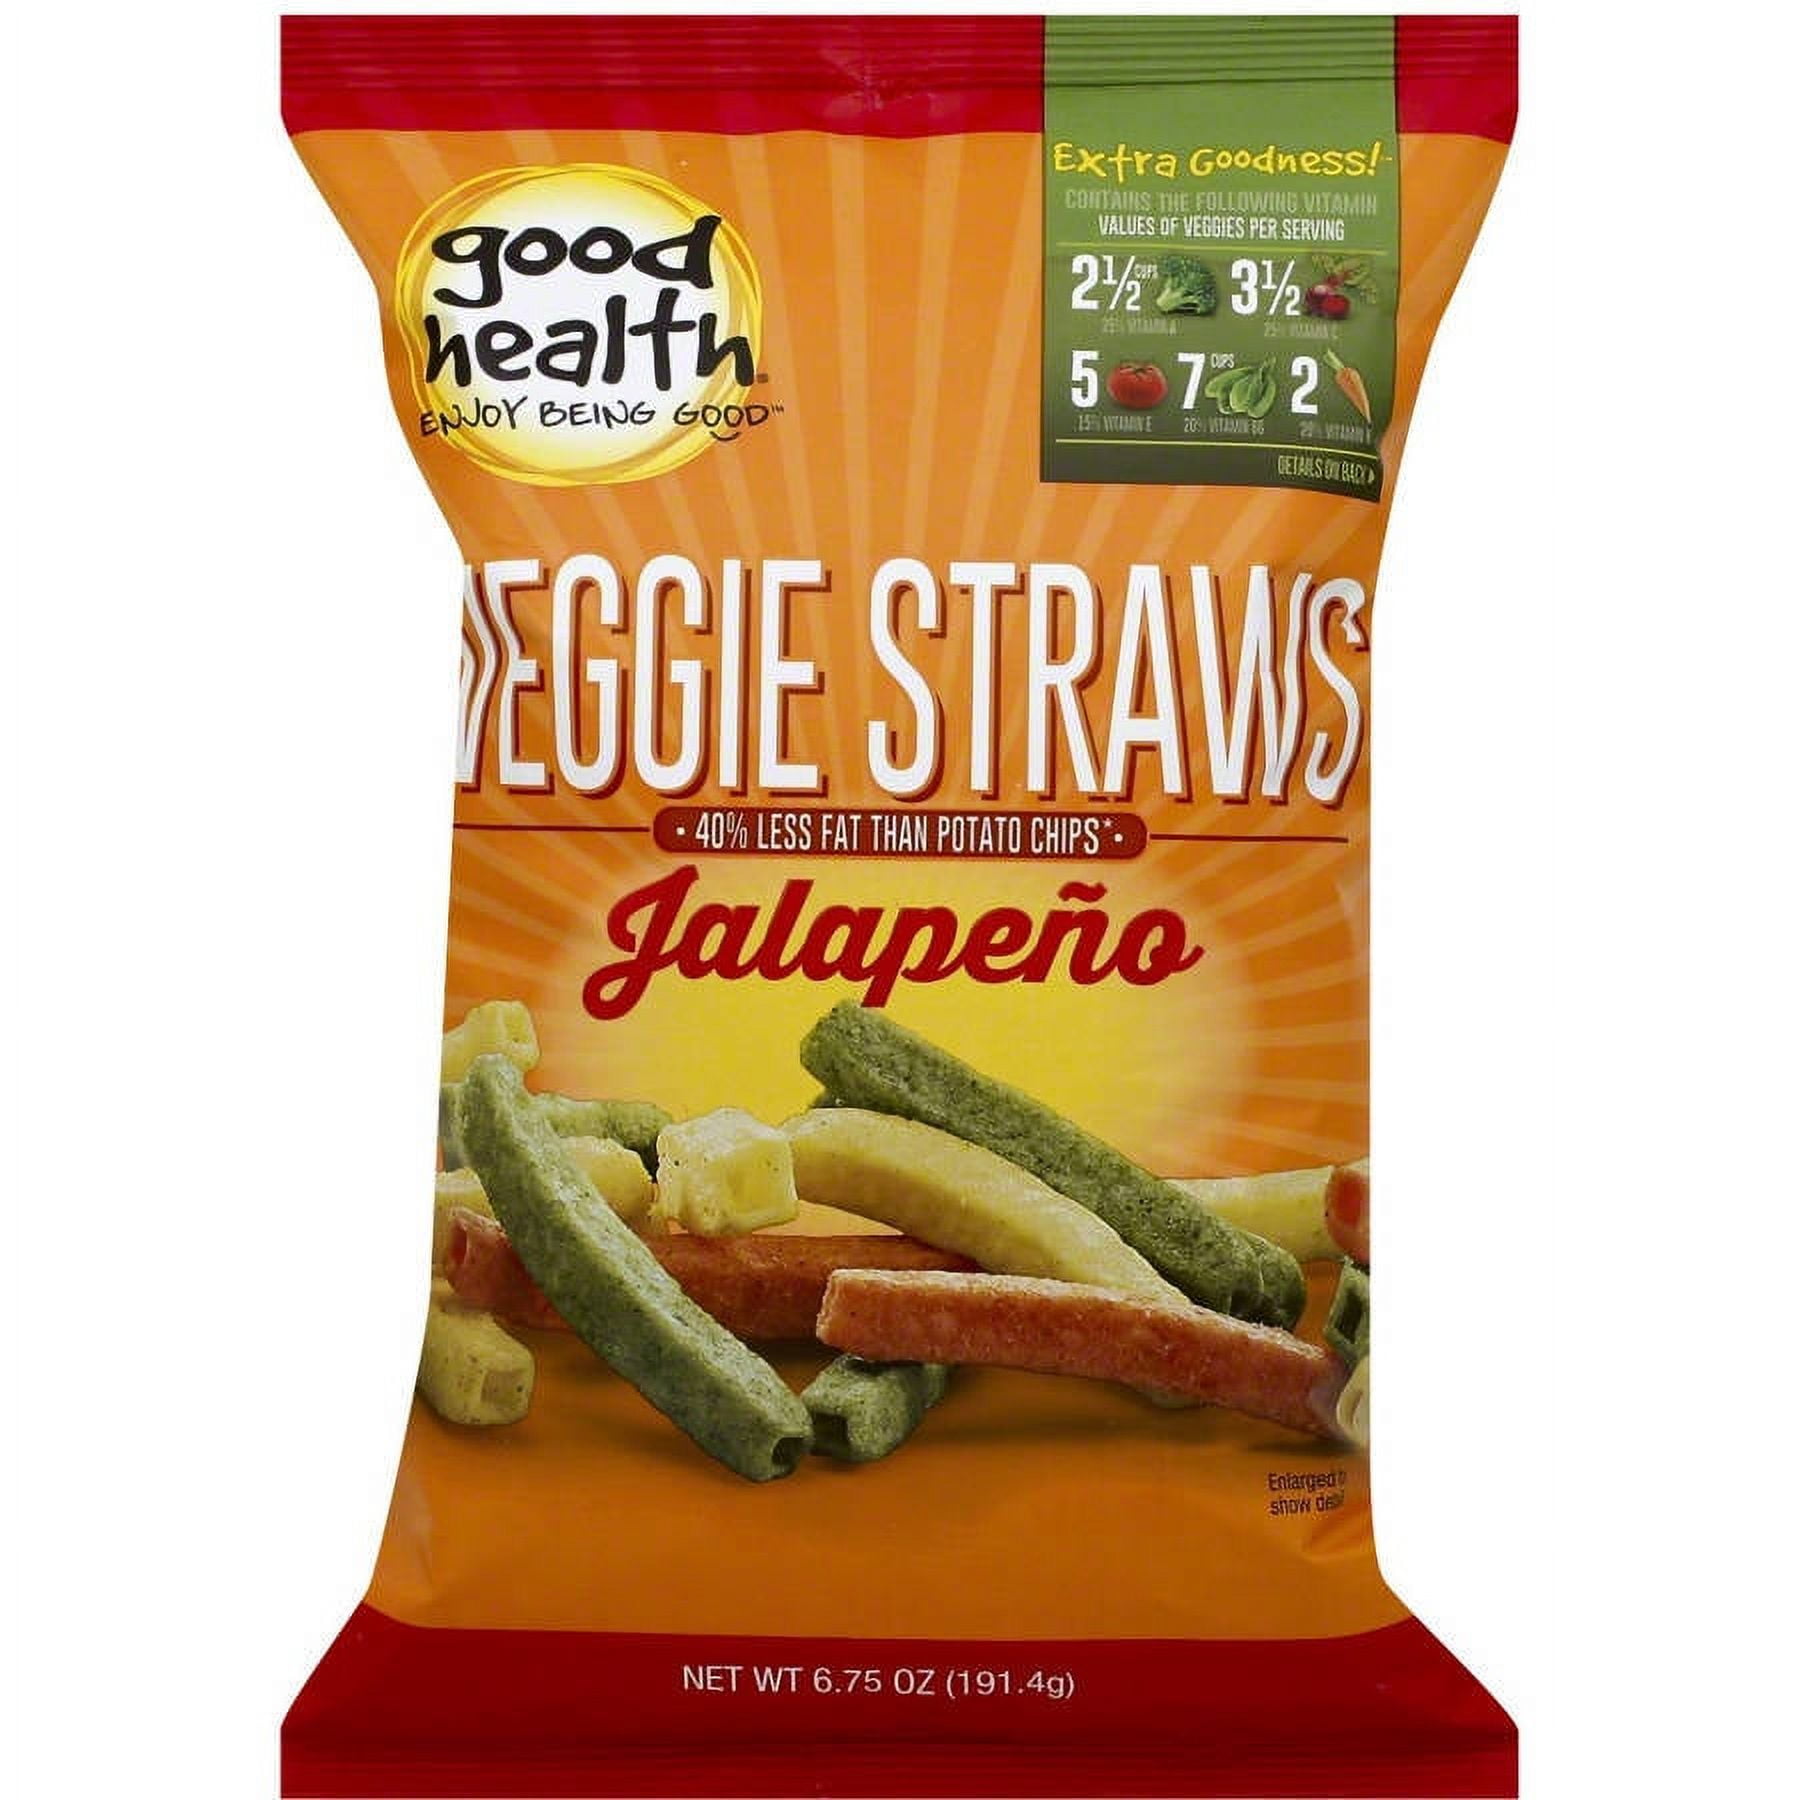 Least Healthy Snacks: Are Veggie Straws Good for You? Nope!